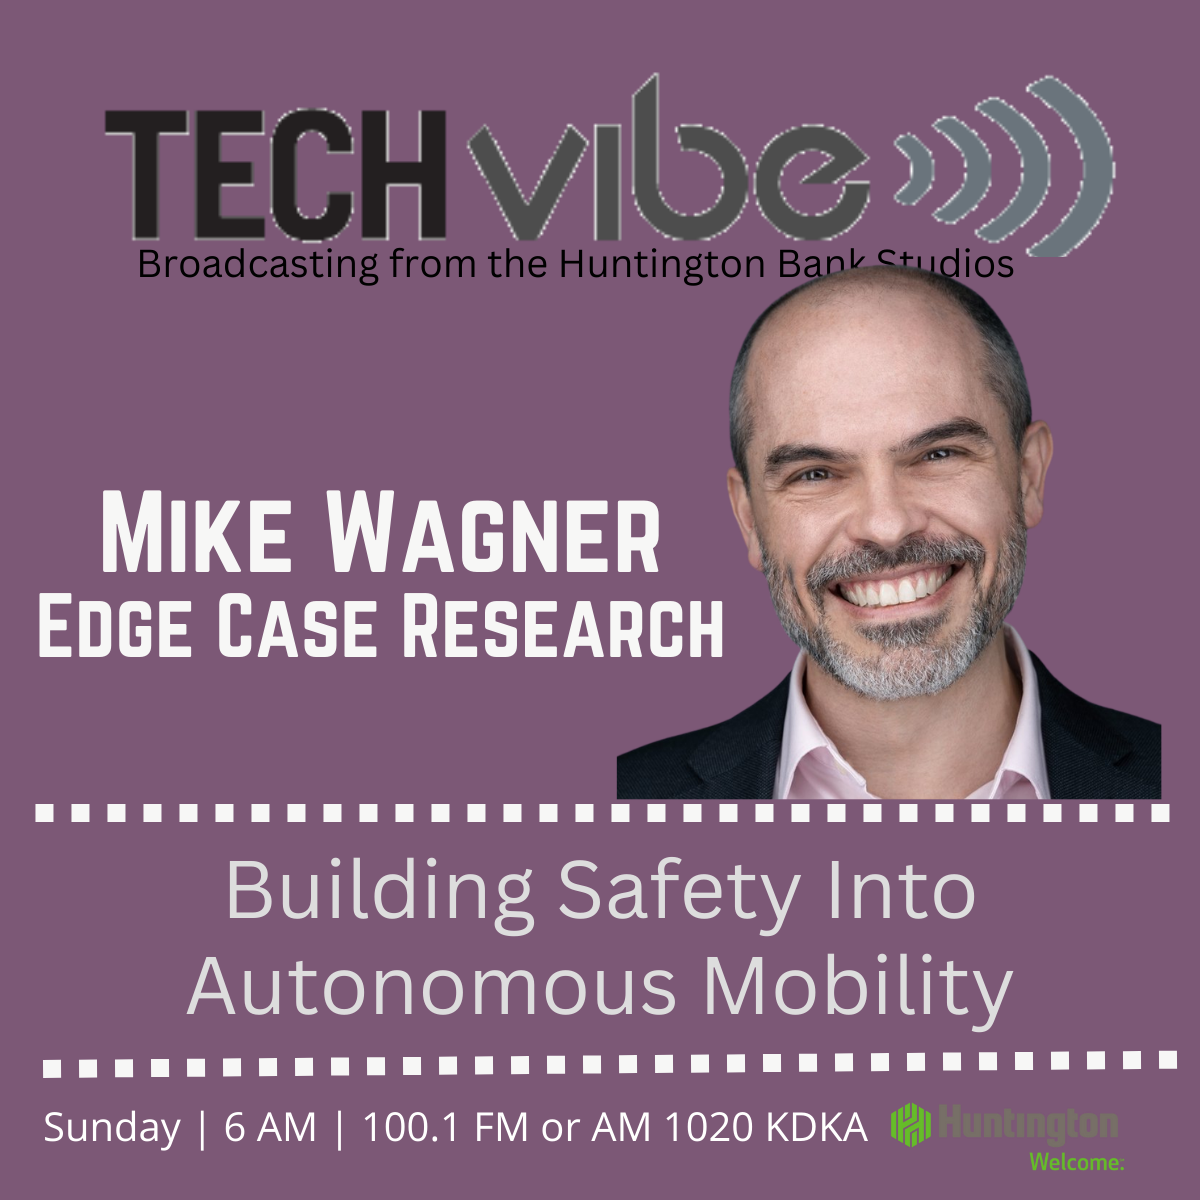 michael wagner edge case research